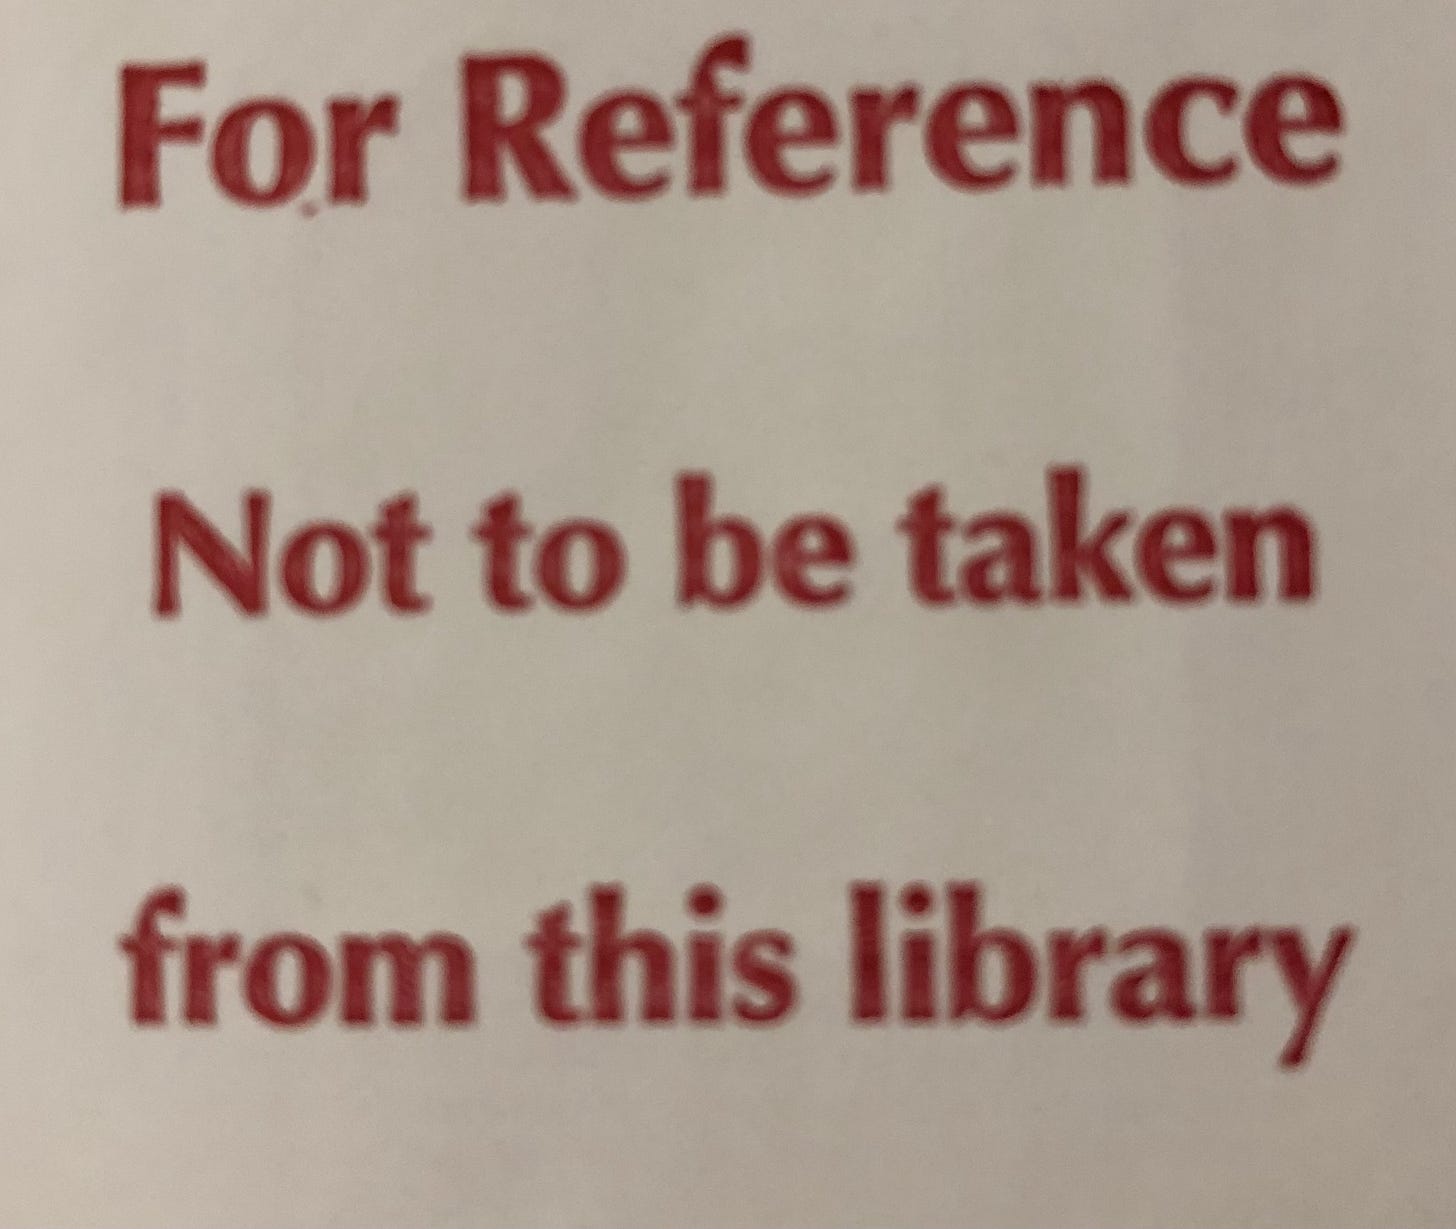 A sticker from the back of a library book that states: For reference . Not to be taken from this library.